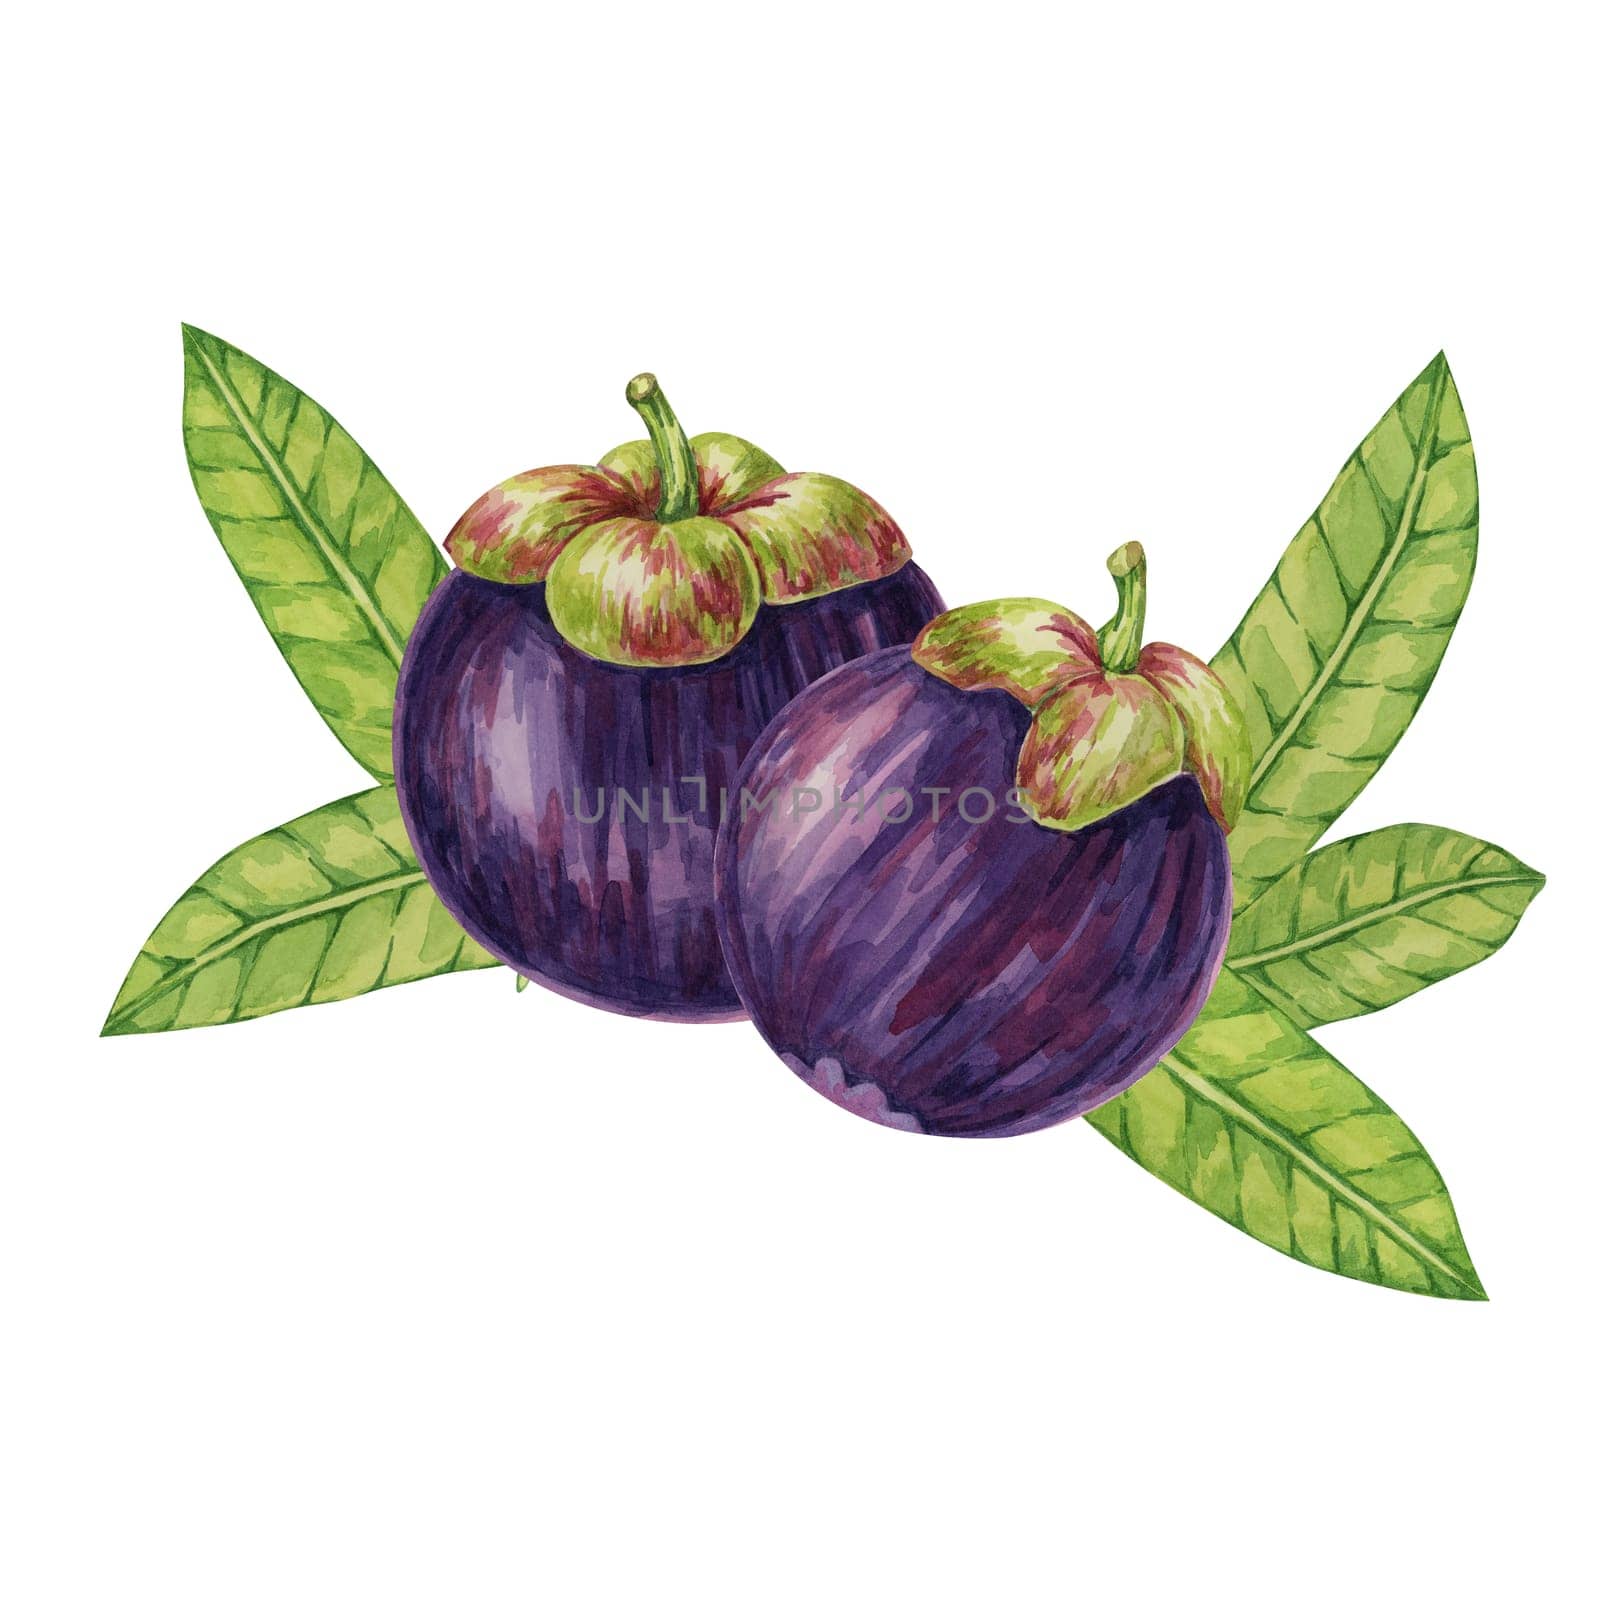 Two Purple mangosteen fruits, leaves tropical exotic Asian plant clipart. Garcinia mangostana tree watercolor illustration for sticker, label, food menu, cosmetic, beauty, scrapbooking, apparel